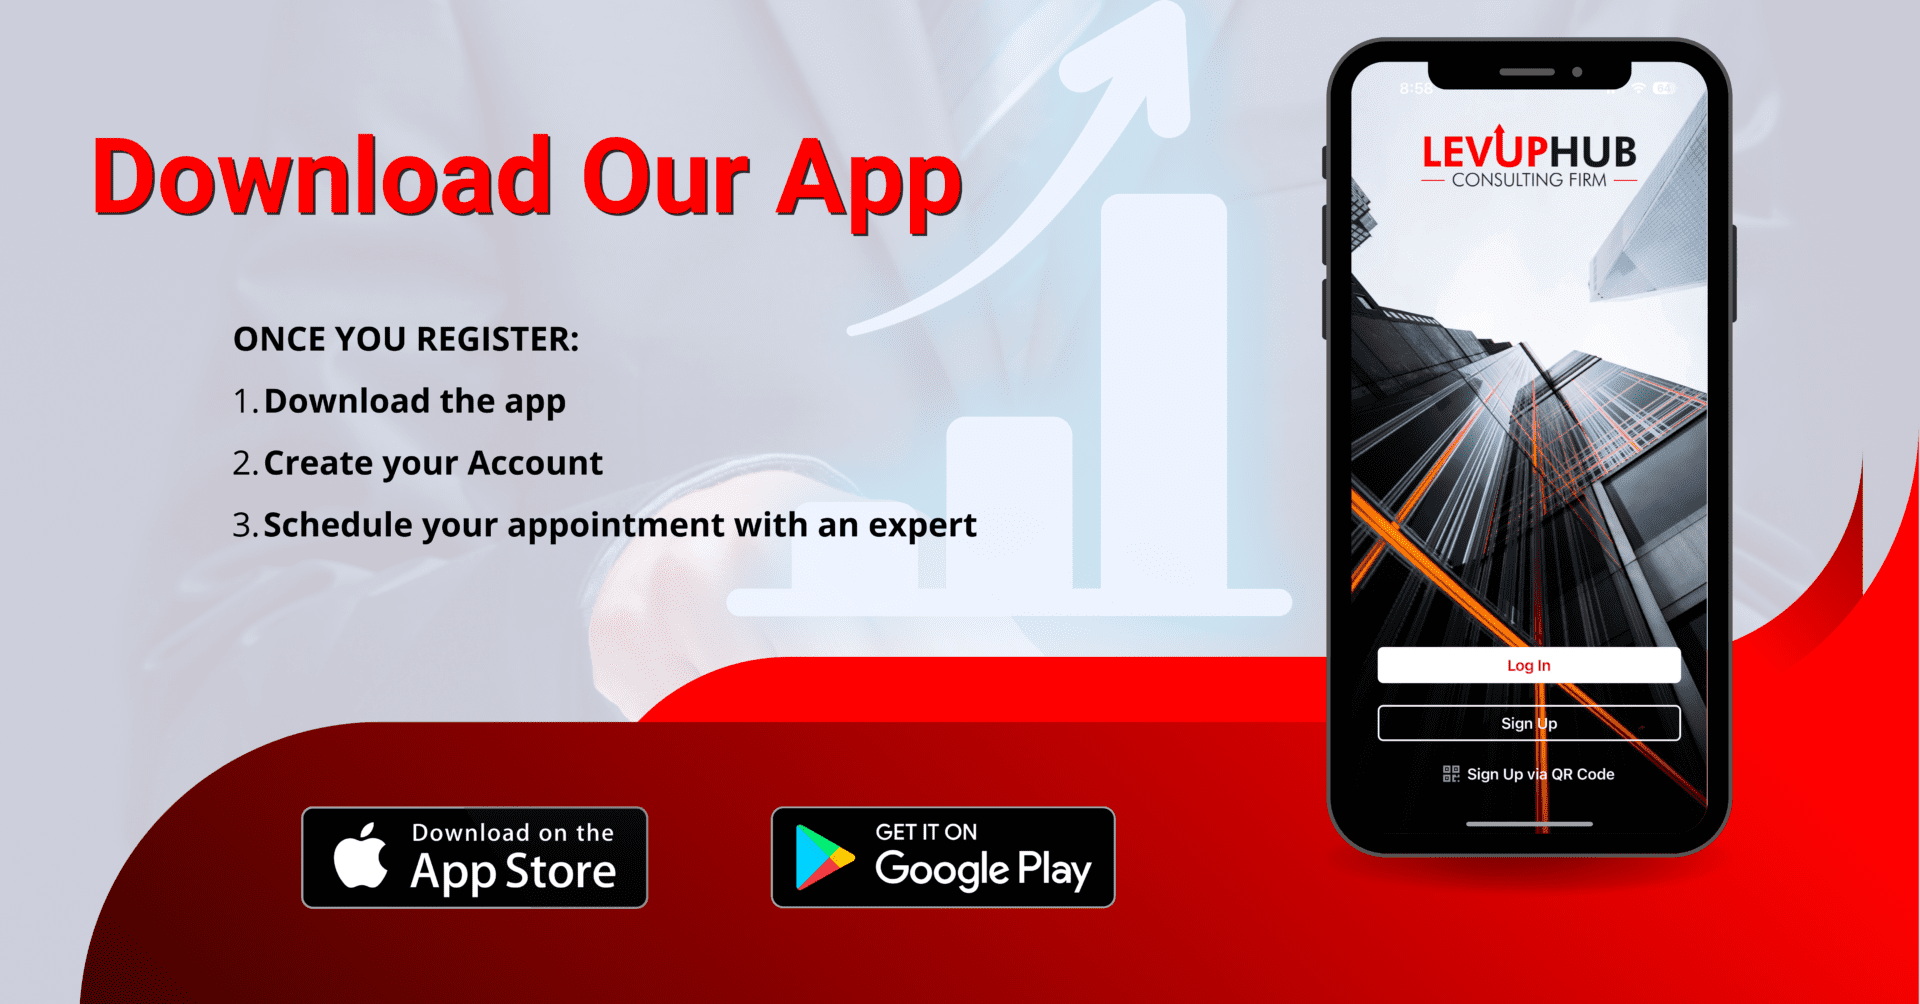 download the levup hub app